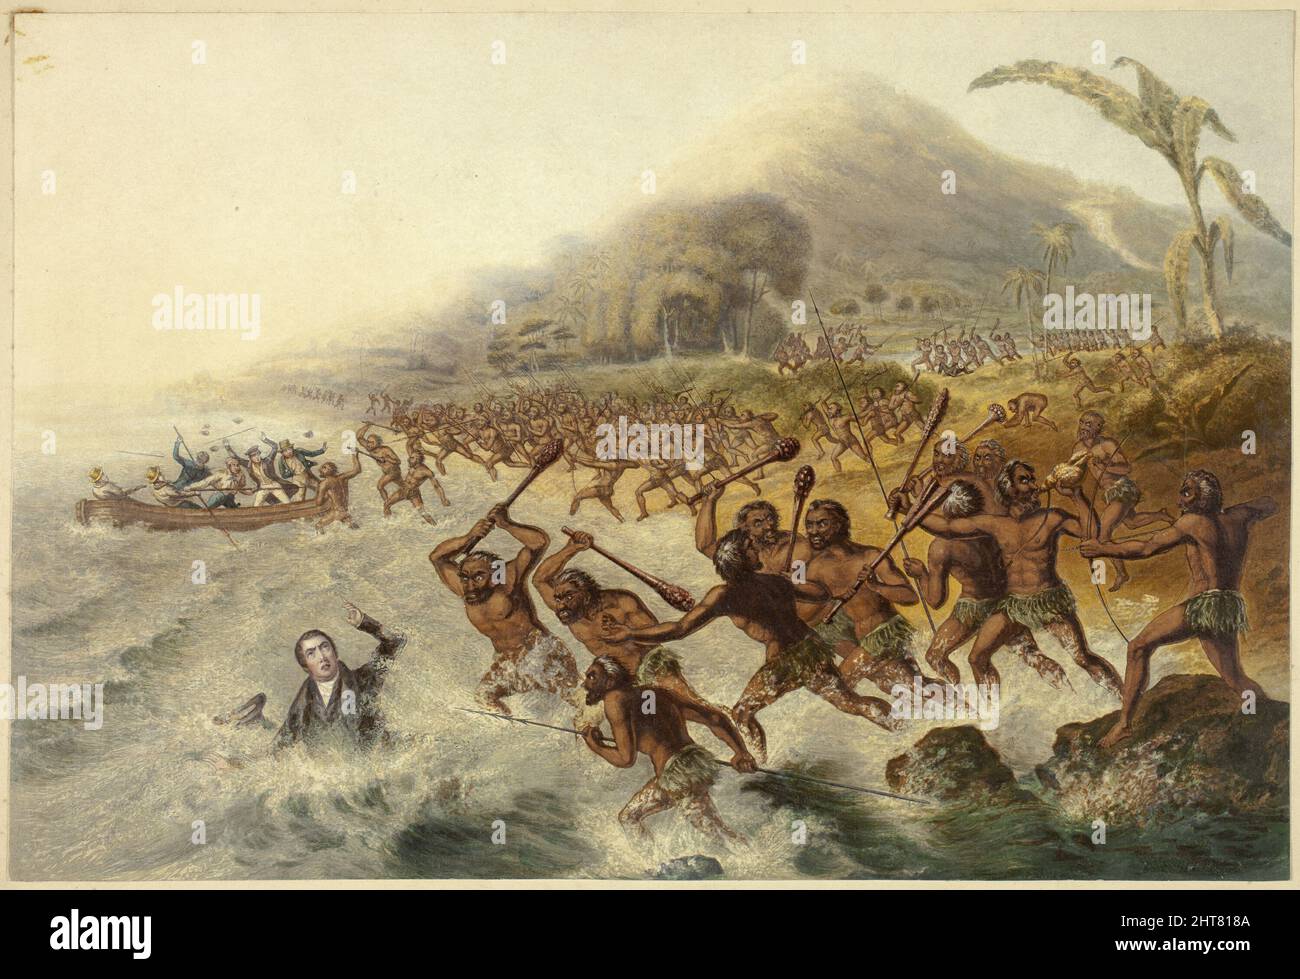 The Massacre of the Lamented Missionary the Rev. J. Williams and Mr. Harris, 1841. Stock Photo